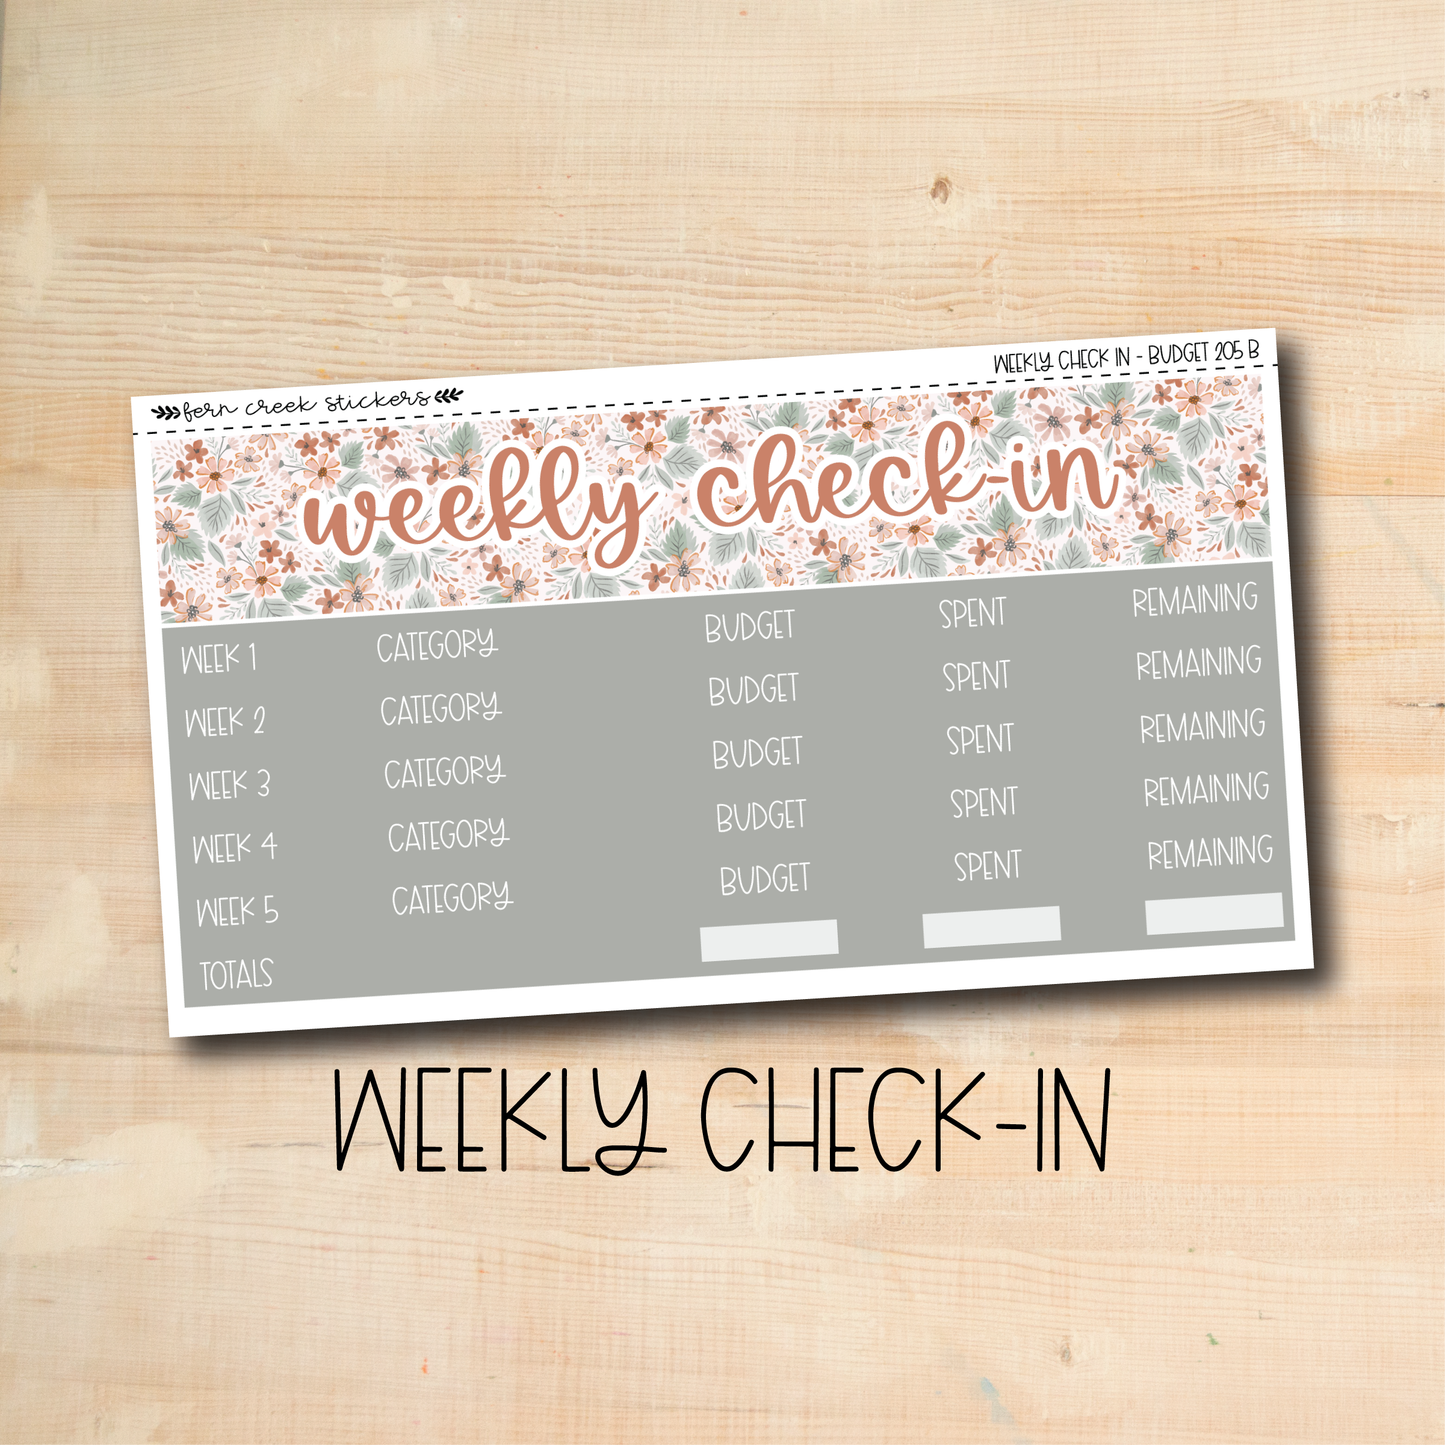 the weekly check - in is displayed on a wooden surface